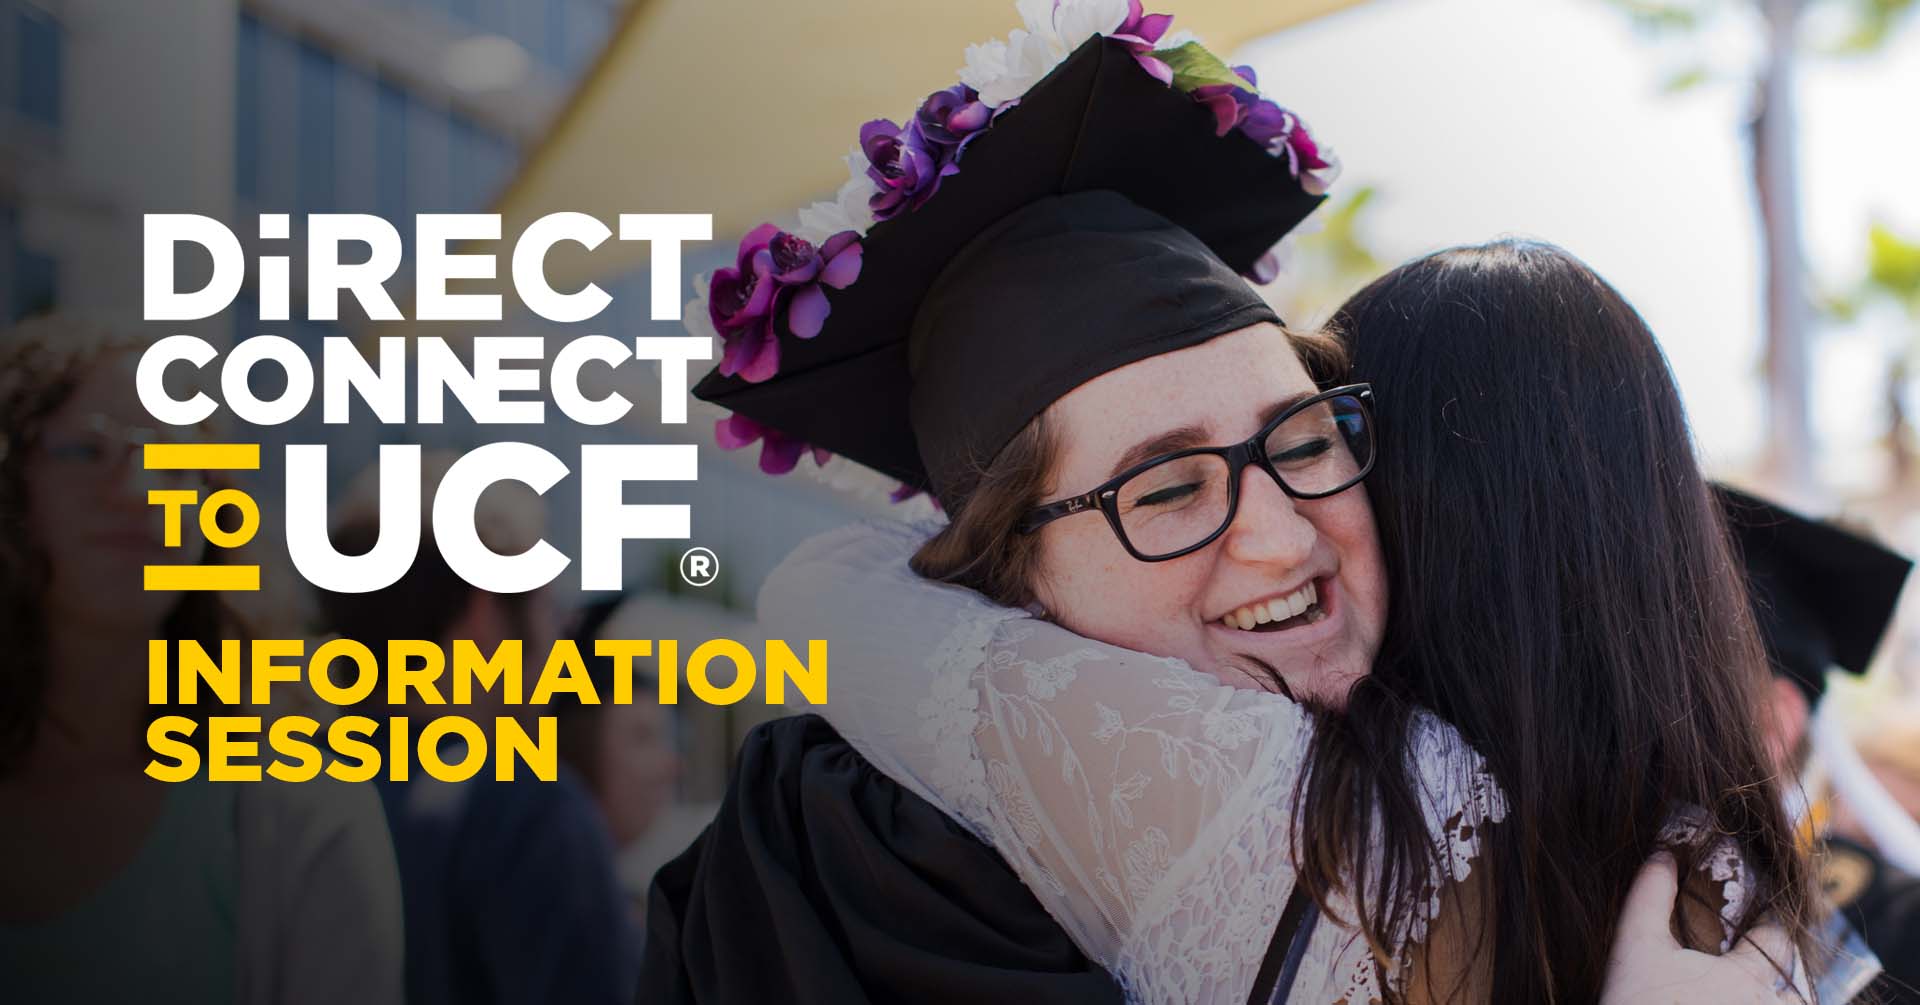 DirectConnect To UCF information session generic image